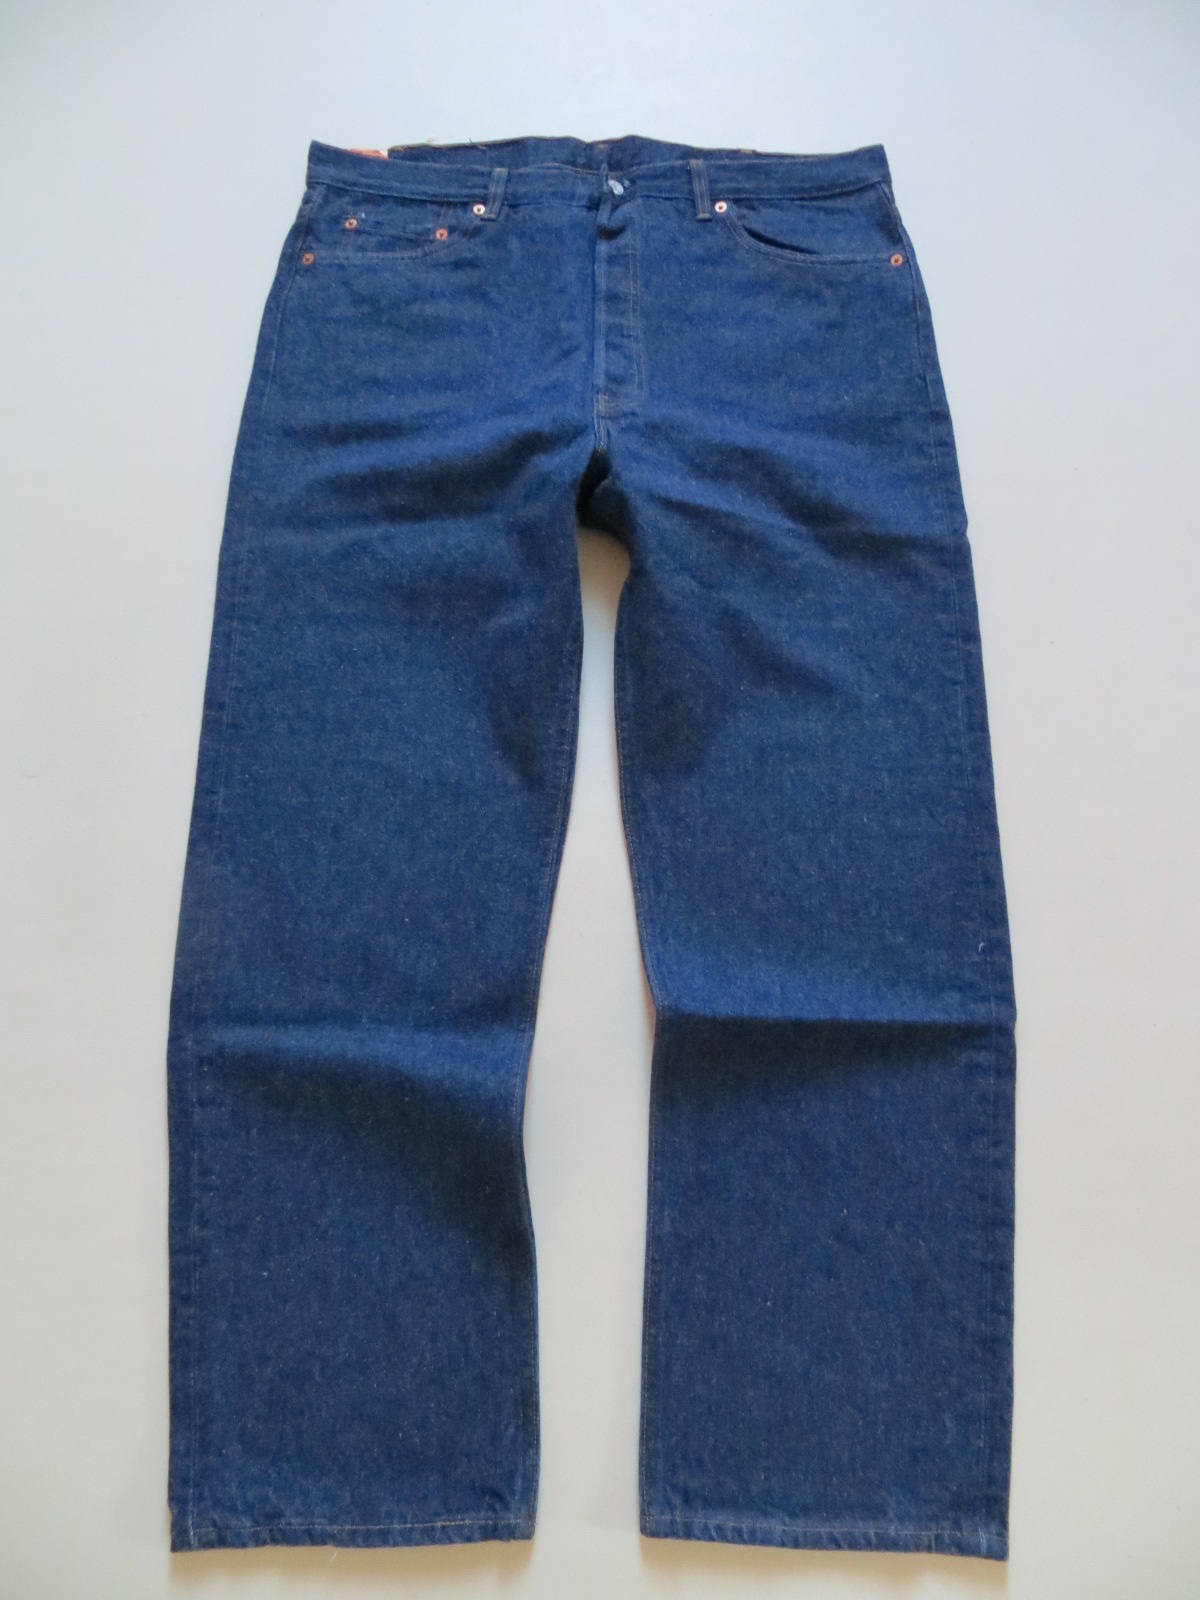 Levi's 501 Mens Jeans Trousers W 40/L 30, NEW! Old School Denim! made ...